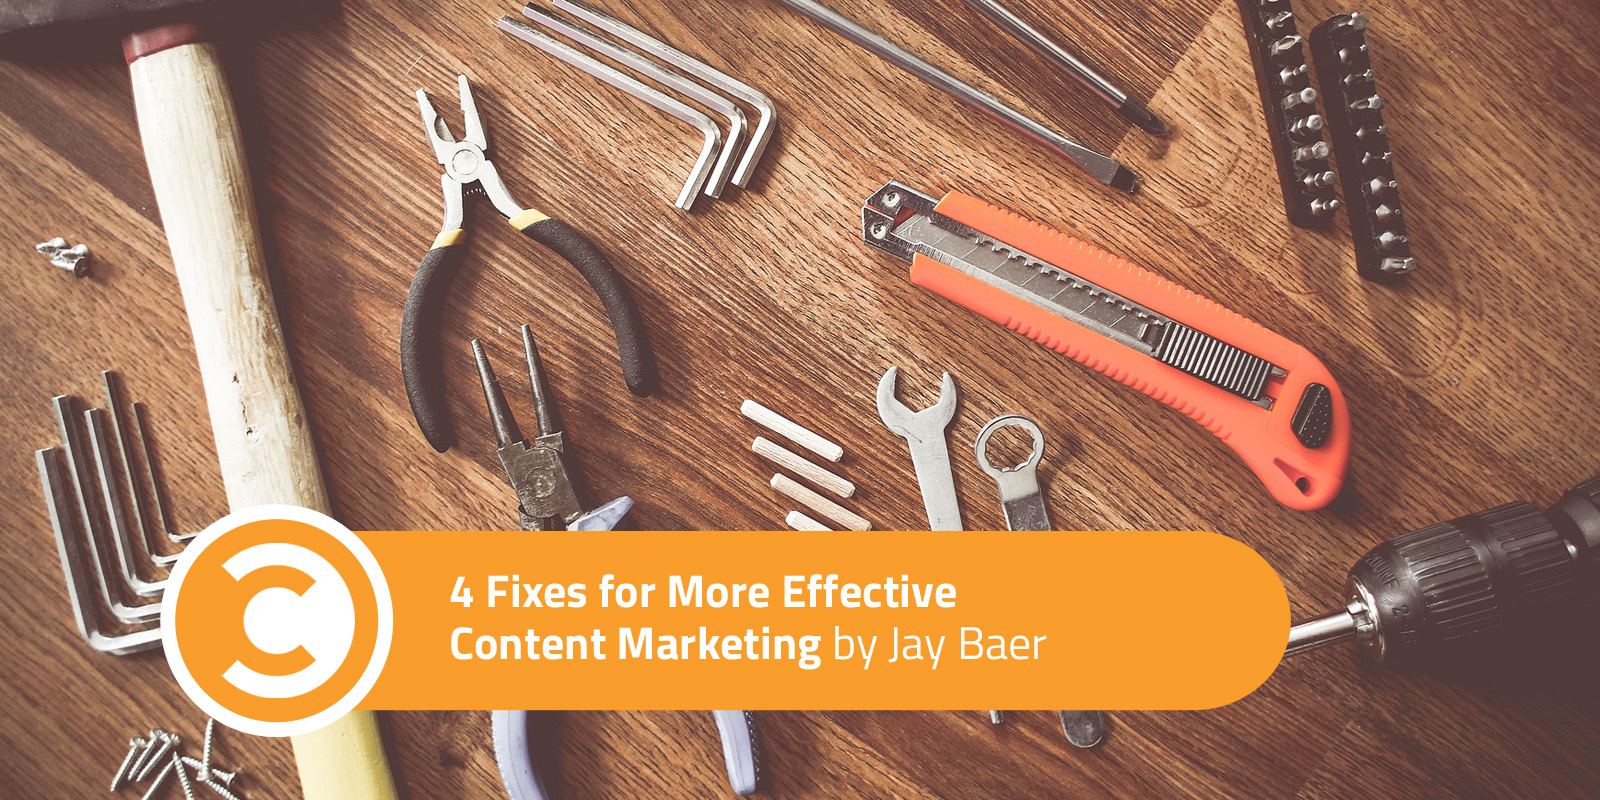 4 Fixes for More Effective Content Marketing